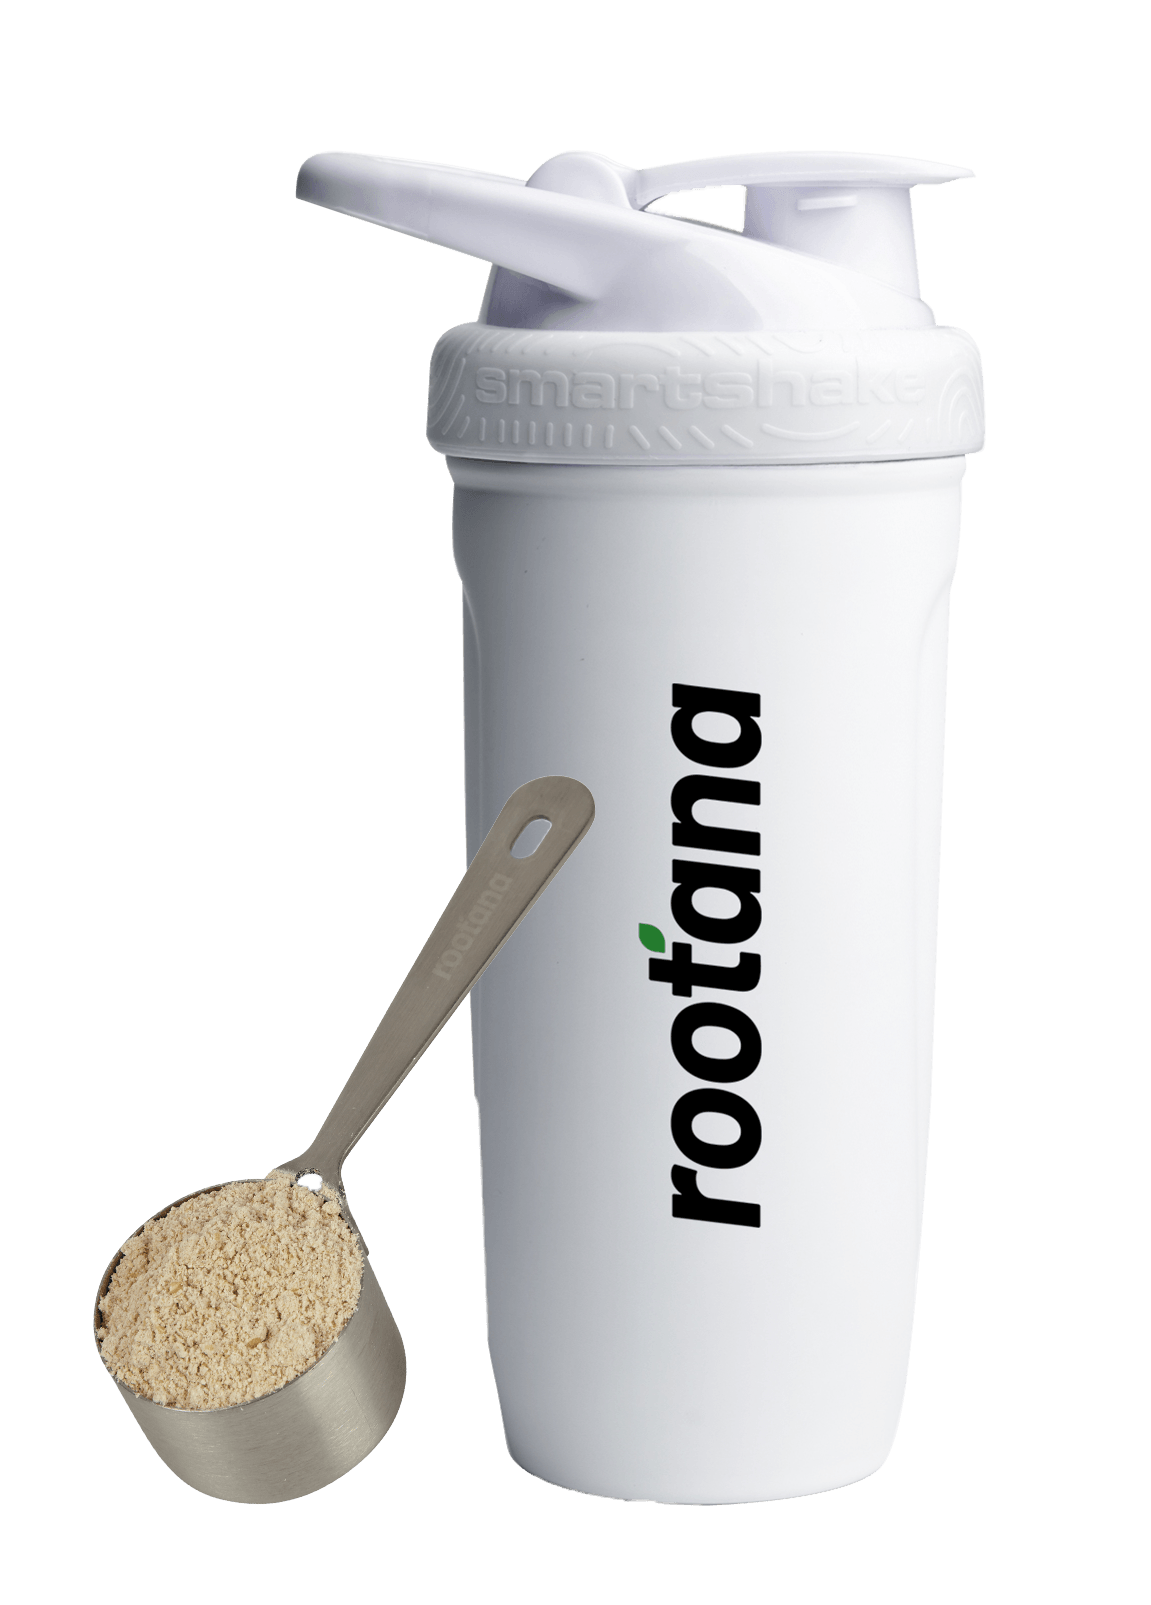 Rootana with scoop and shaker